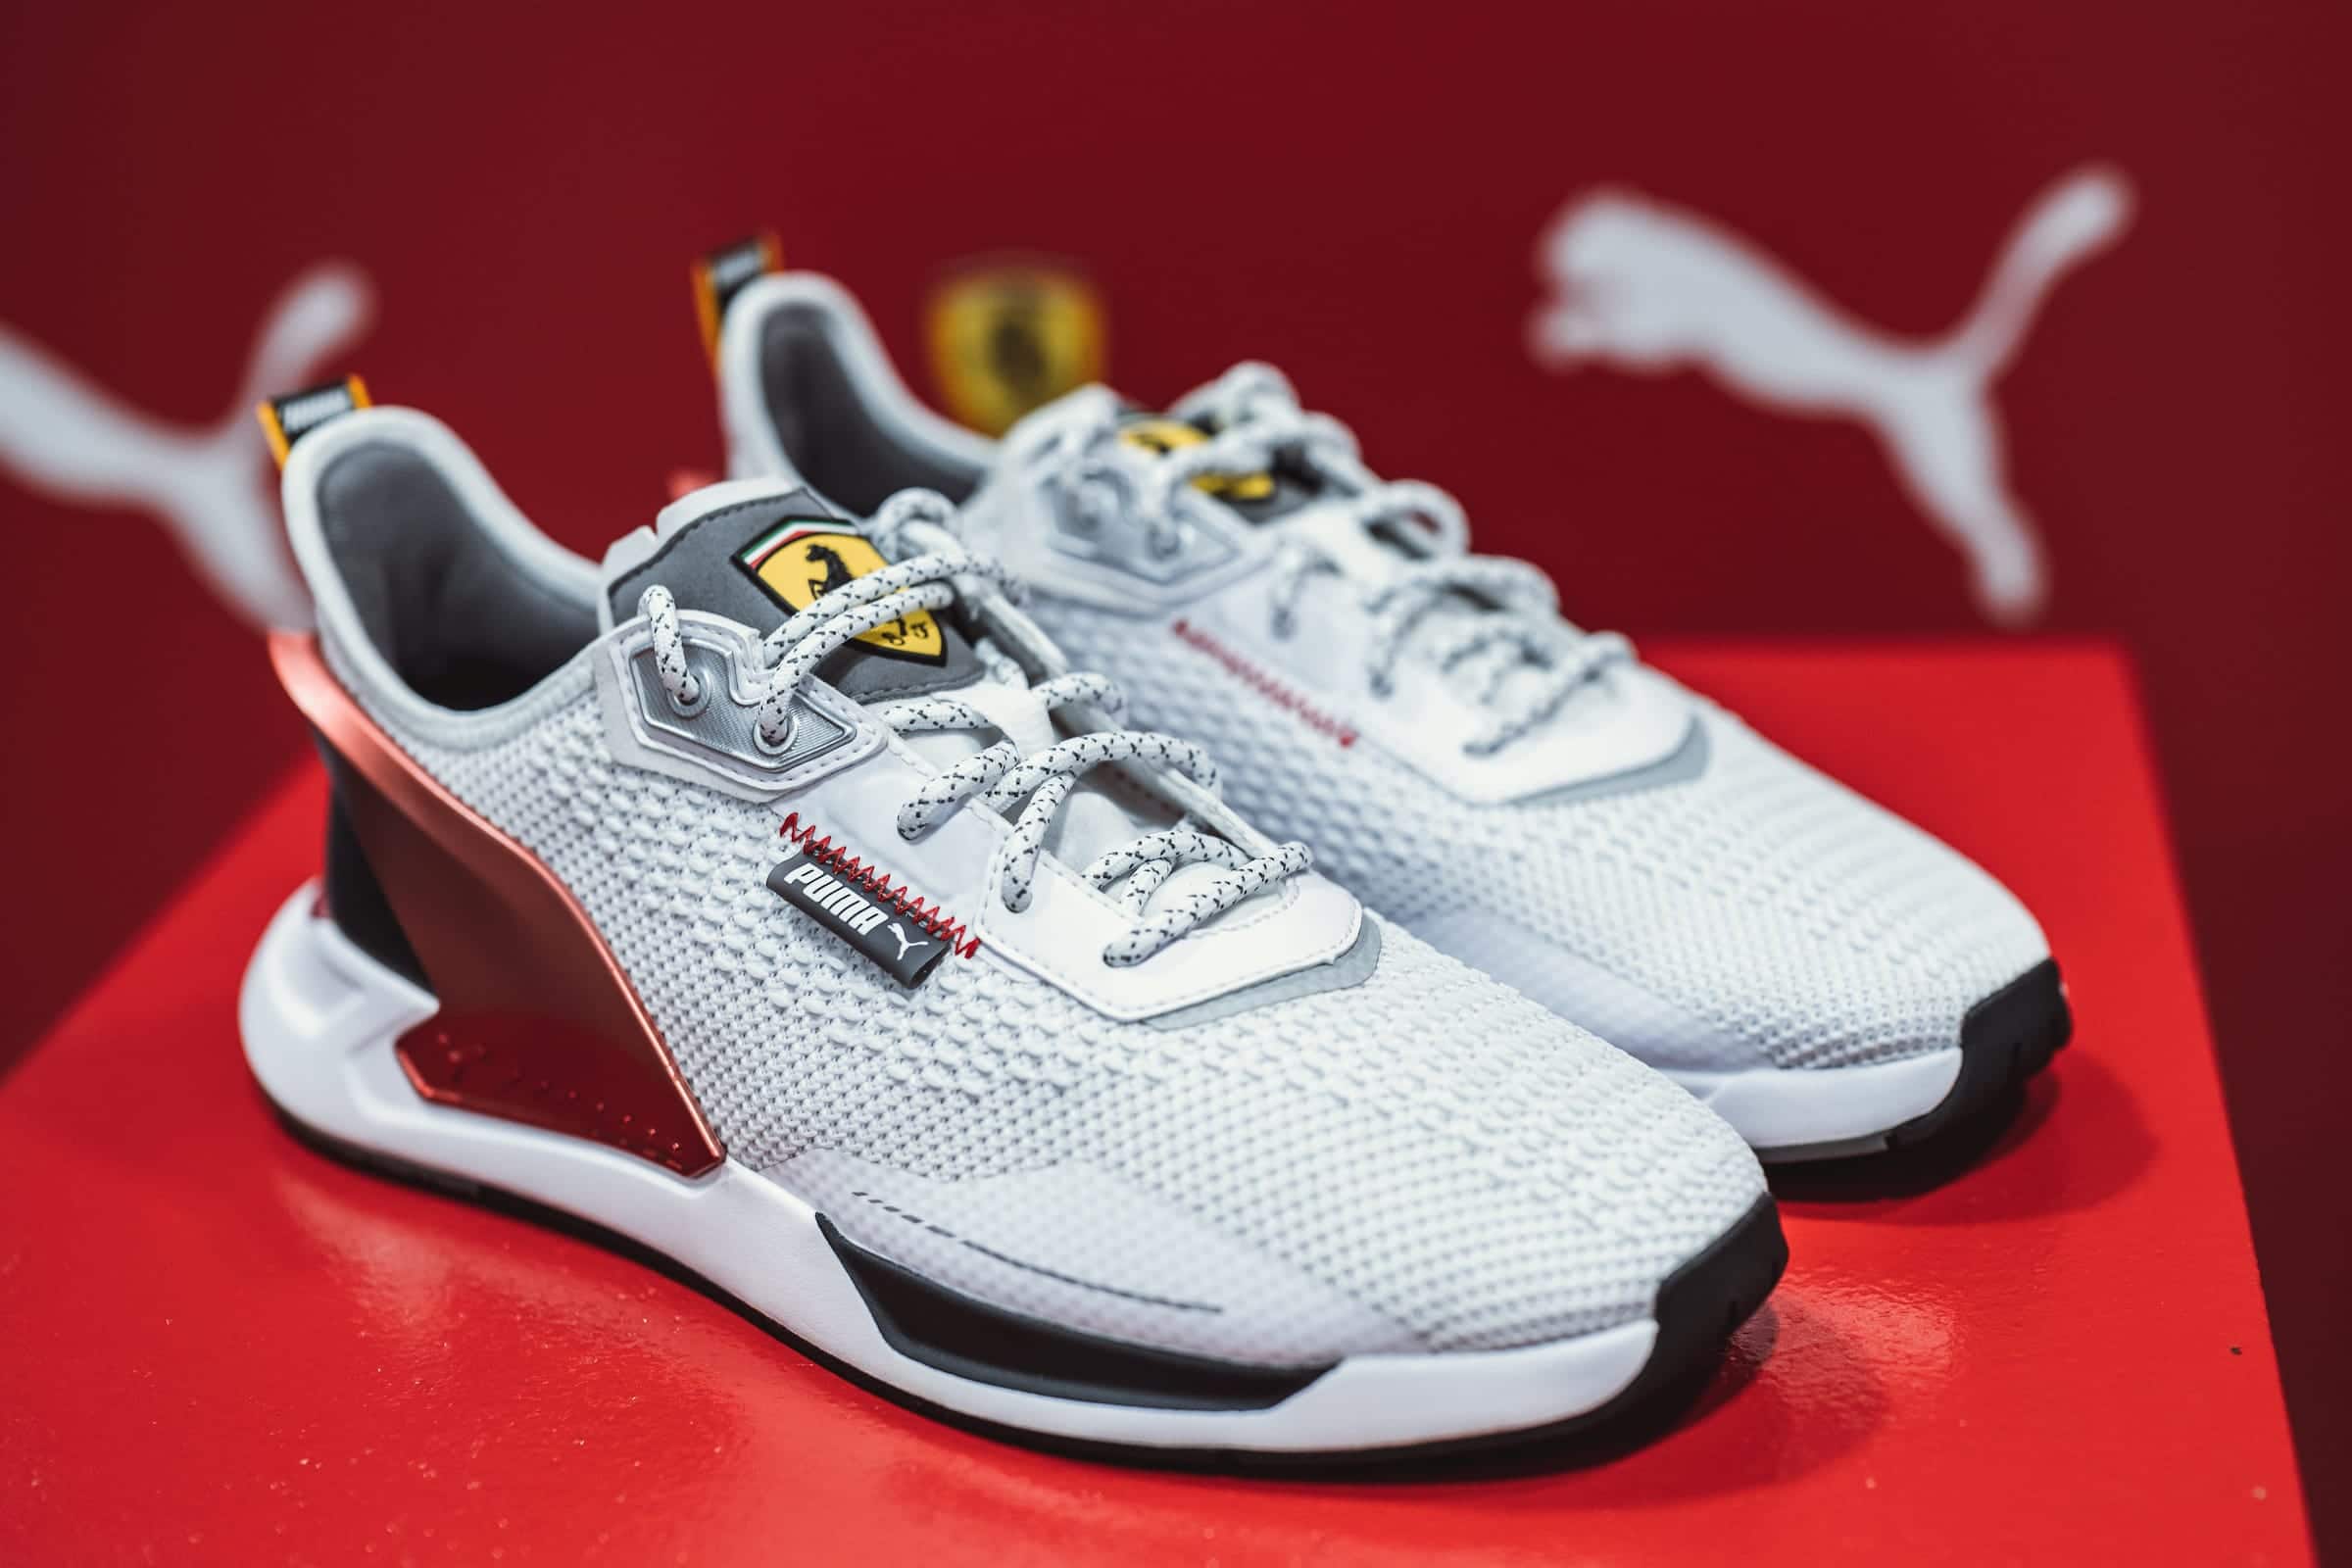 PUMA Together With Ferrari Embodies Racing DNA With The Launch Of The ...